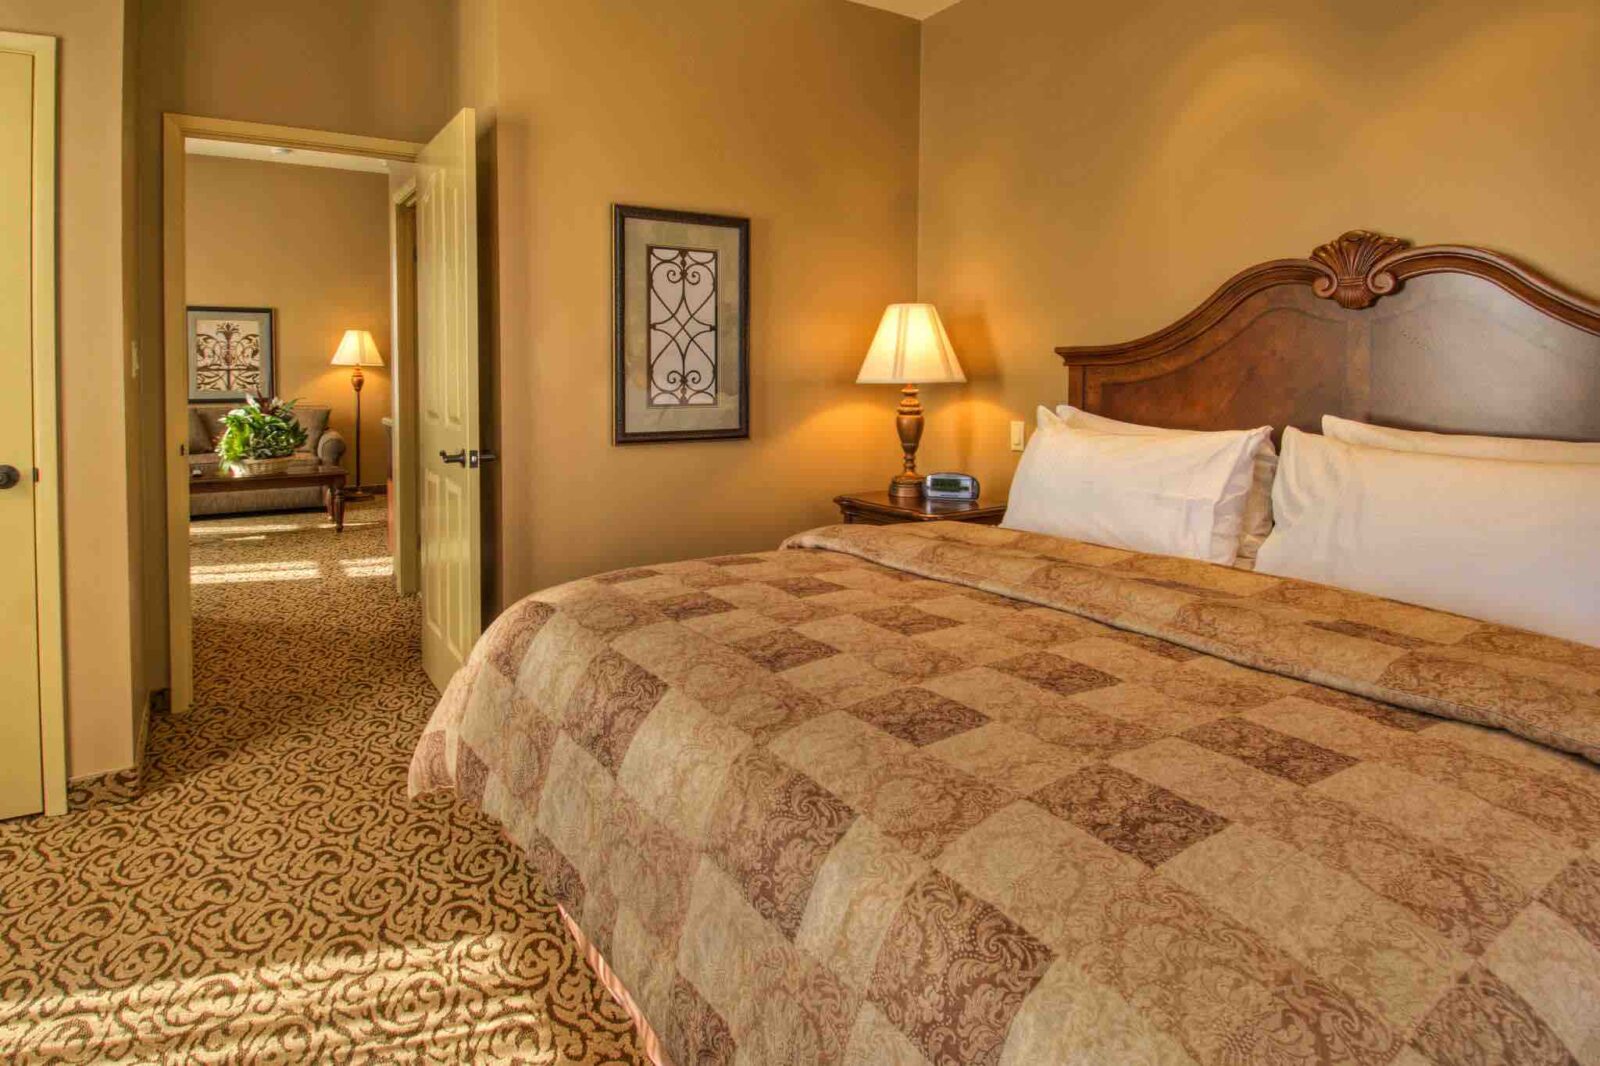 The Top Luxury Hotels in Stratford Ontario & Great Places To Stay